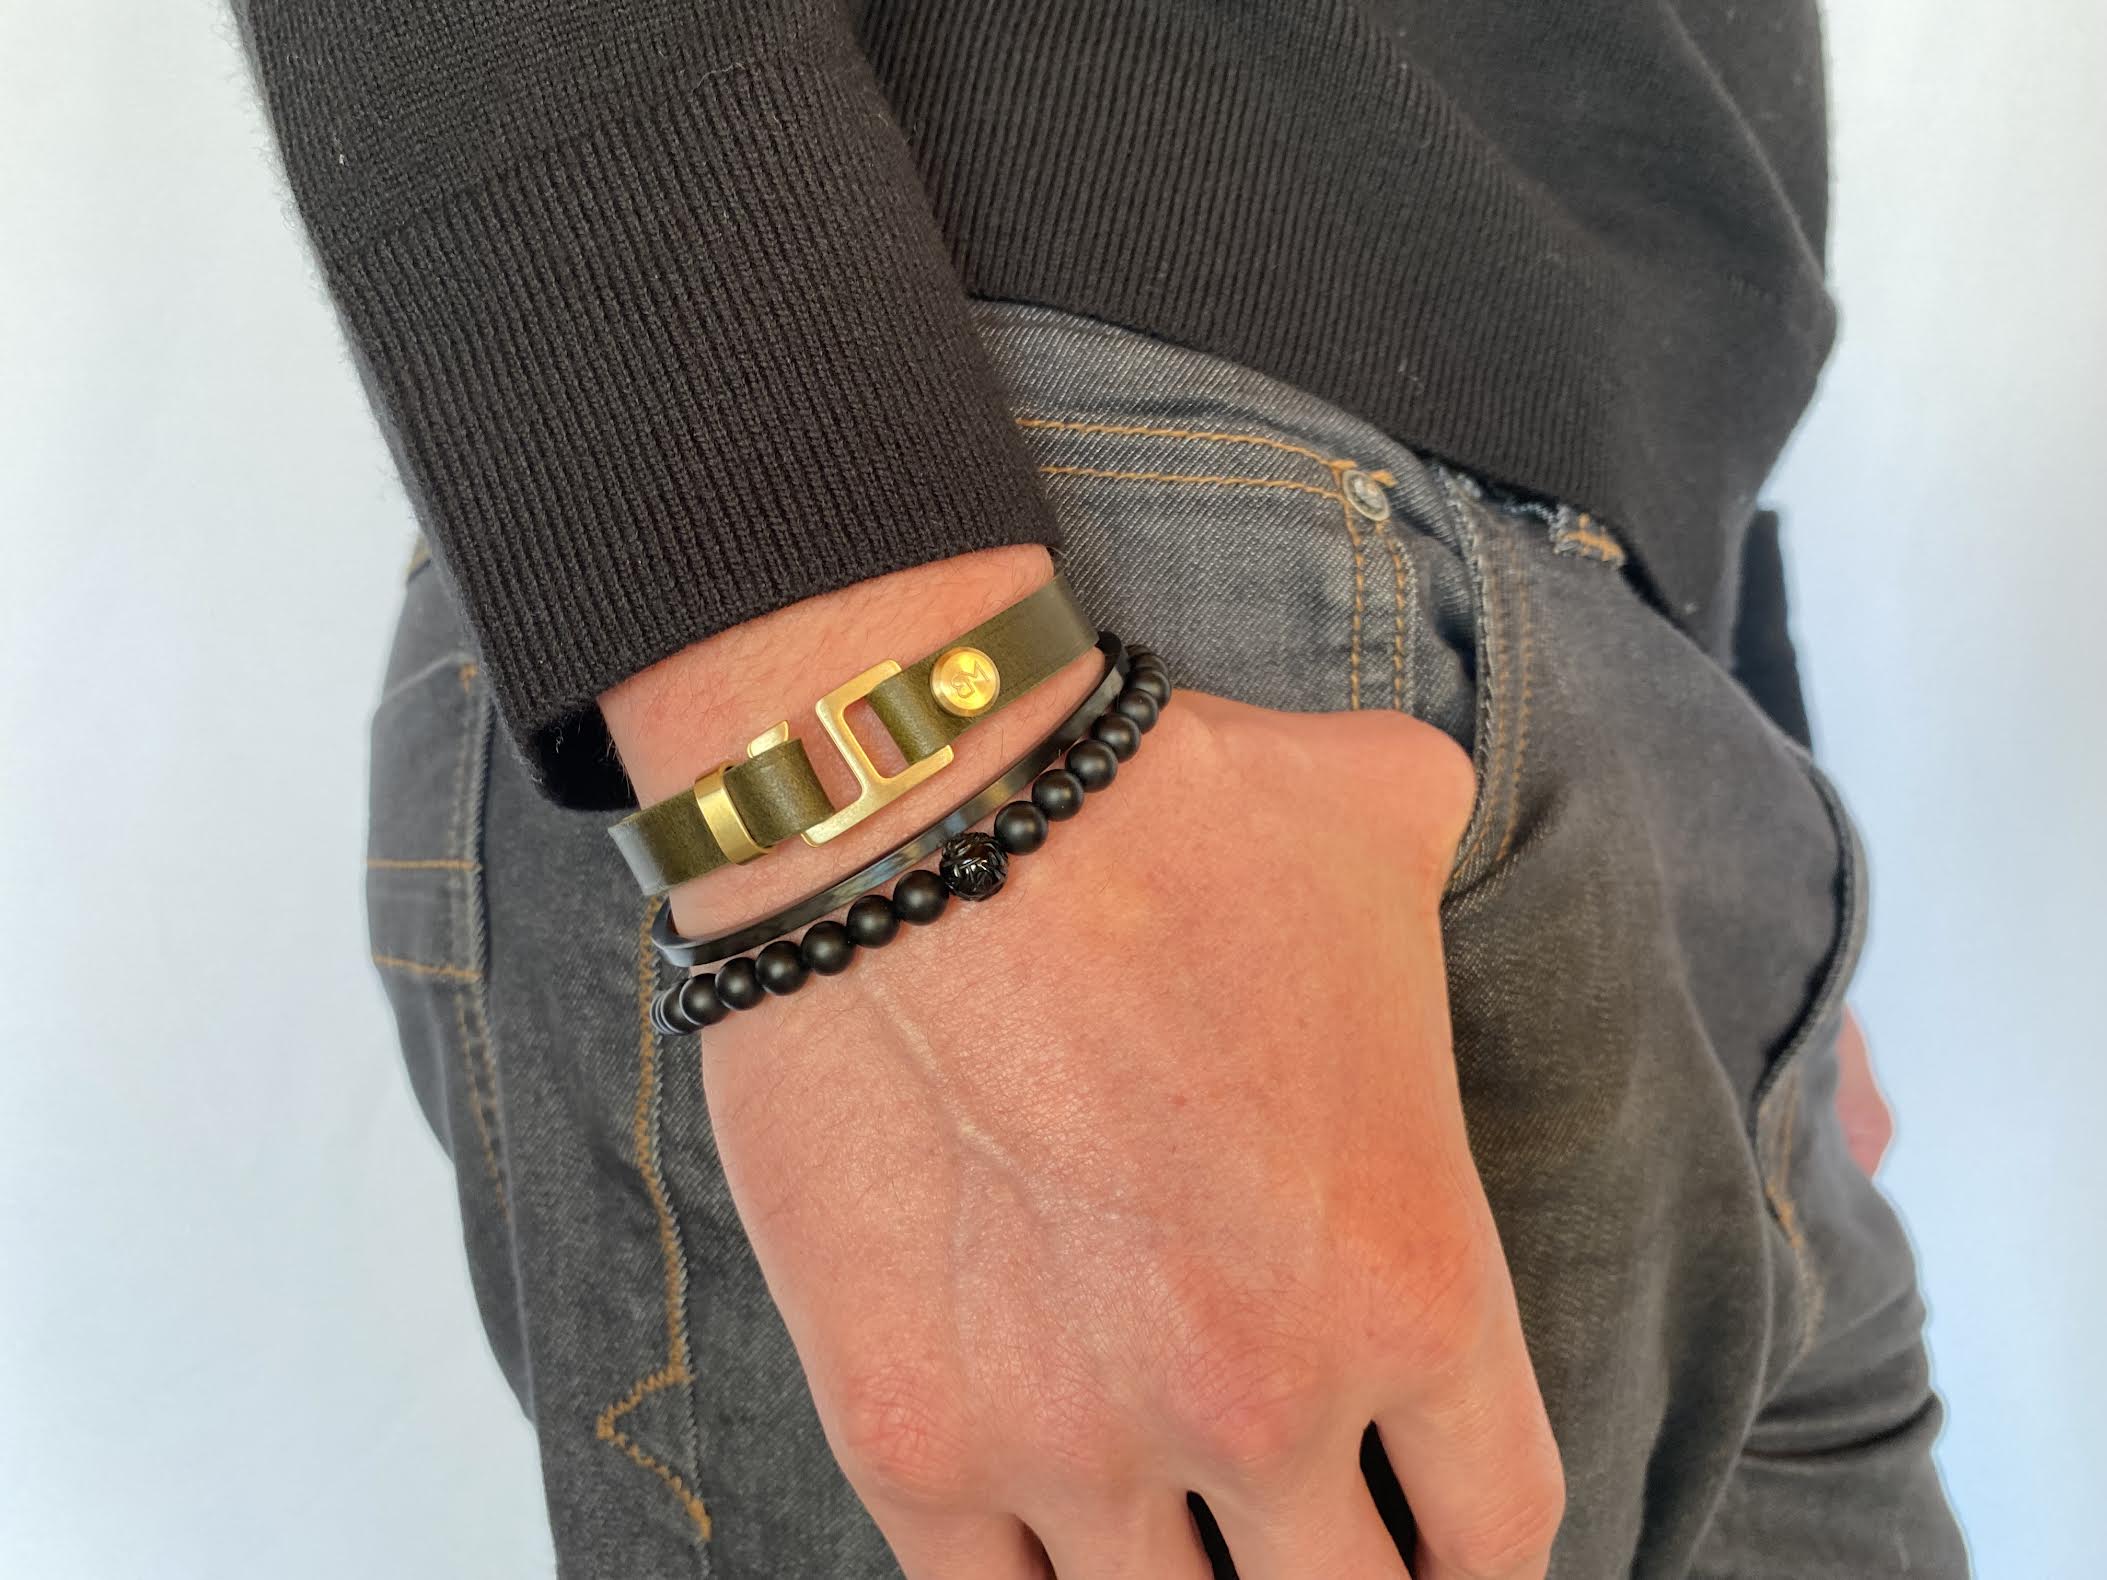 With a trendy, cool modern vibe, this olive/tuscan Italian leather cuff bracelet is paired with your choice of brushed yellow gold, rose gold, stainless steel, or black ceramic hardware. Our signature cuff bracelet is a modern staple for your WristBend collection.  Made by WristBend